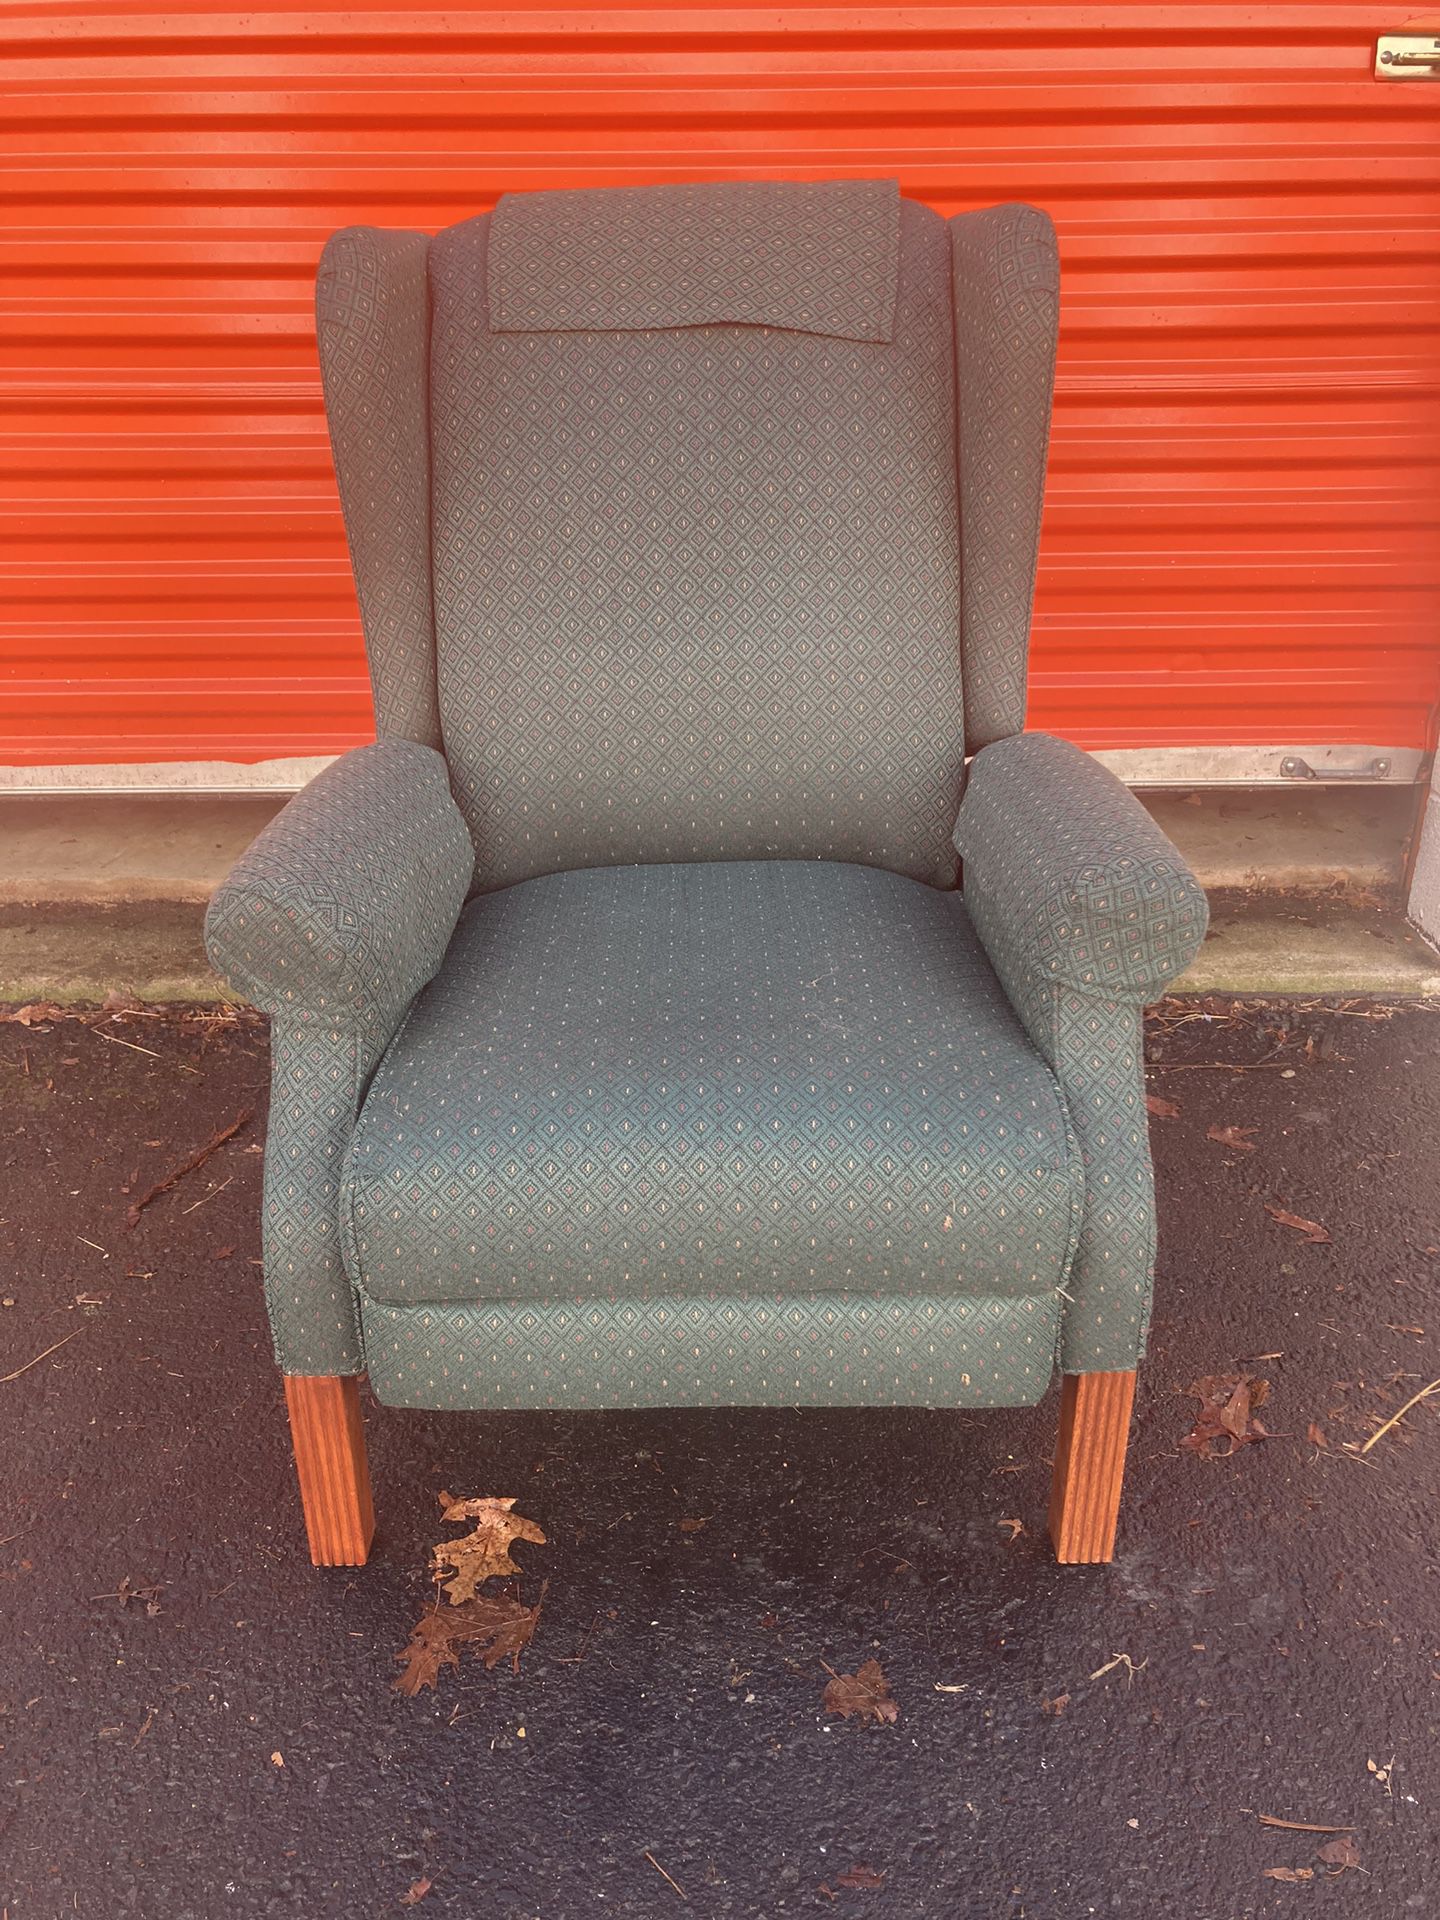 Free Delivery - La Z Boy Mahogany Vintage Patterned Arm Chair